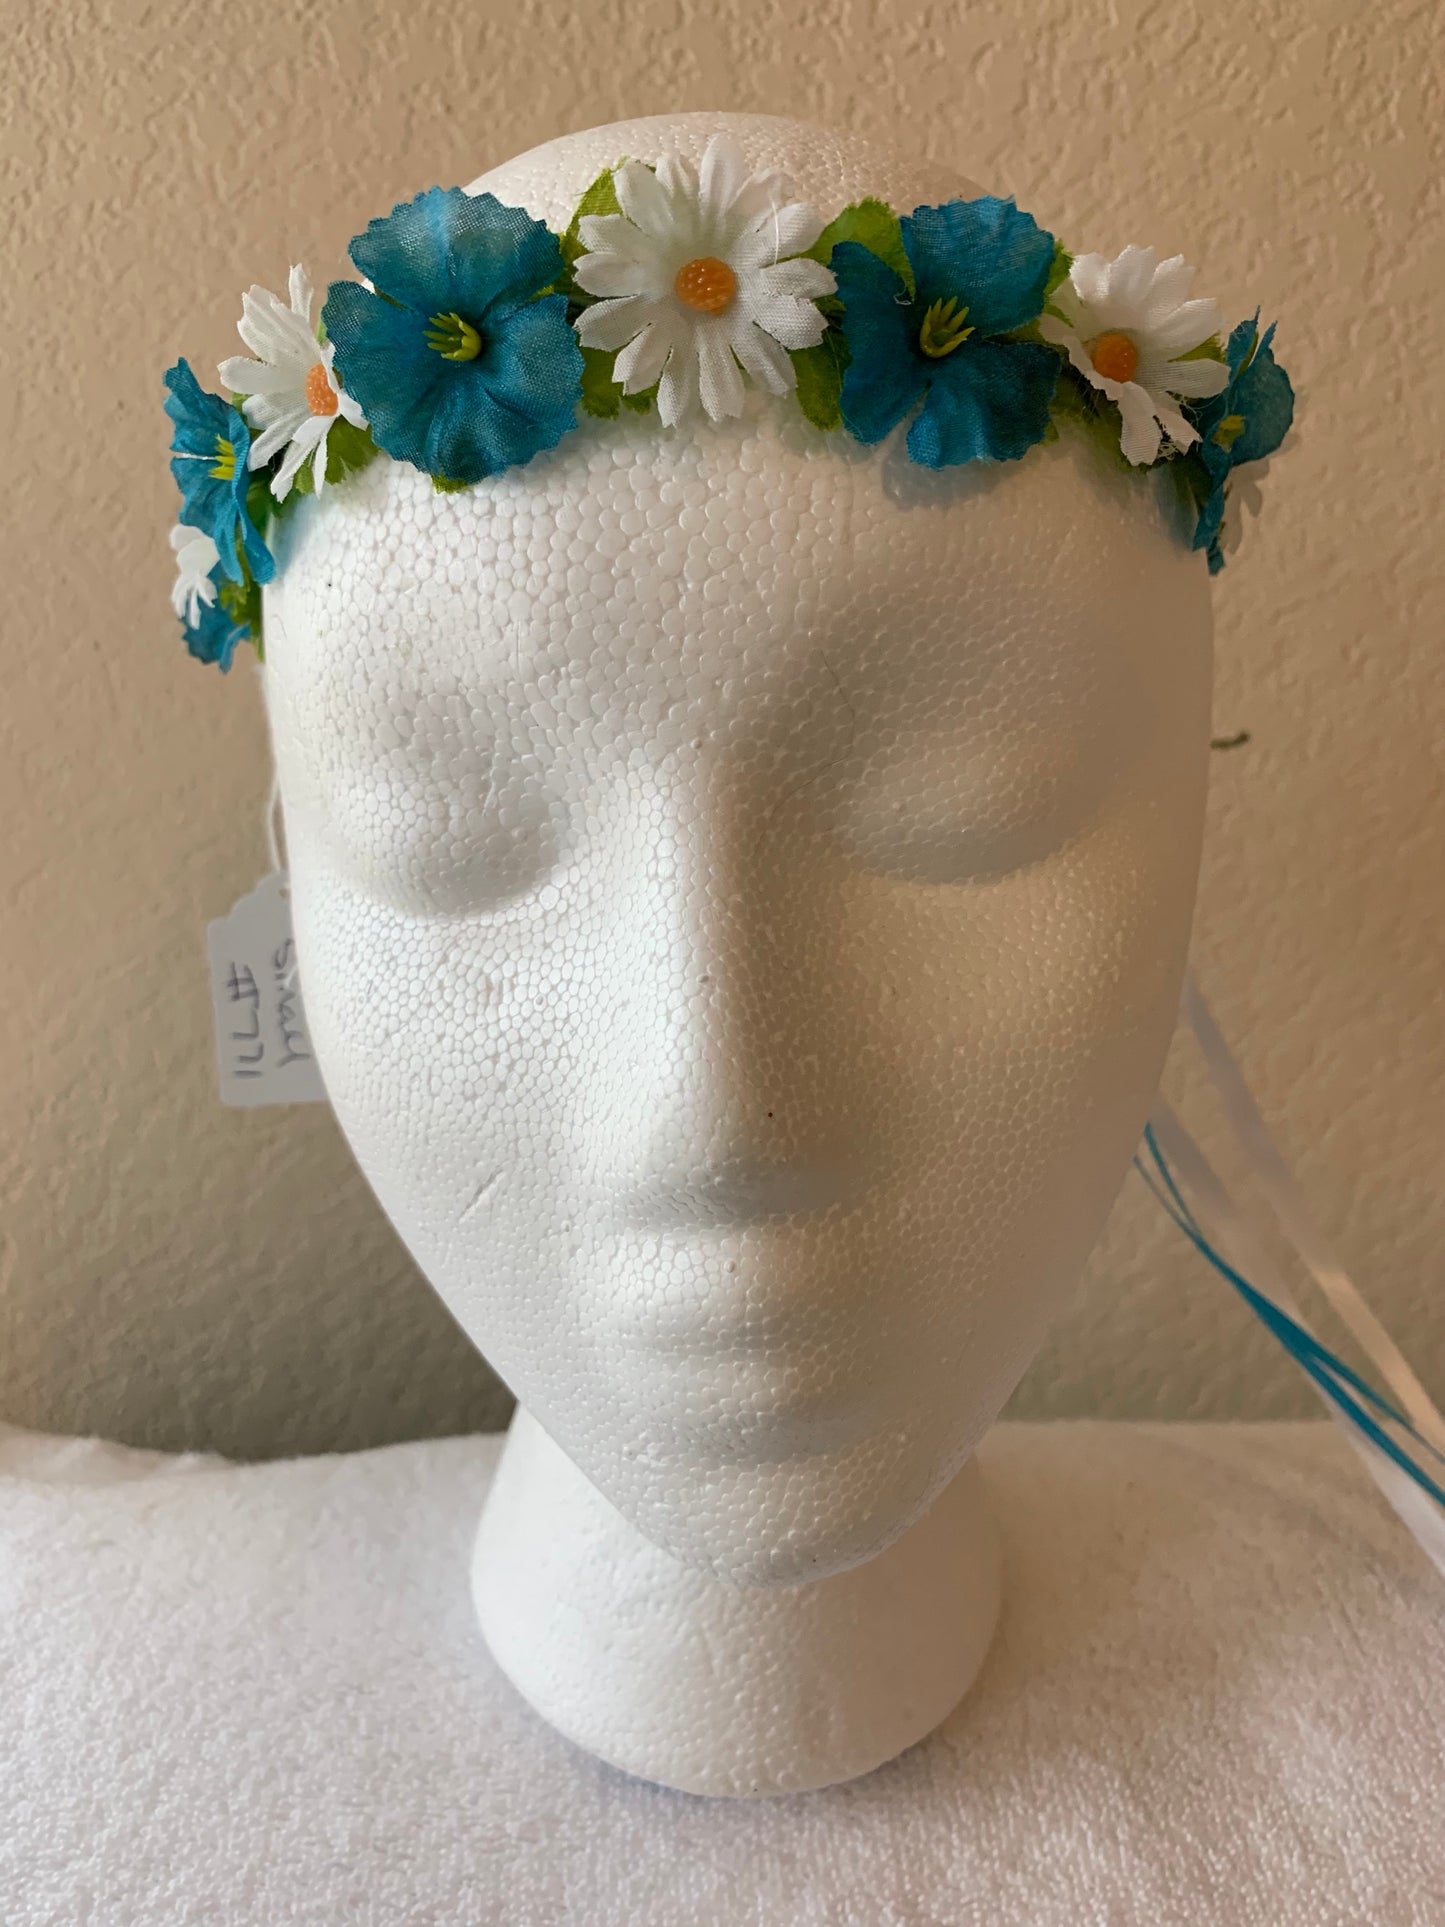 Extra Small Wreath - Teal and White Daisies